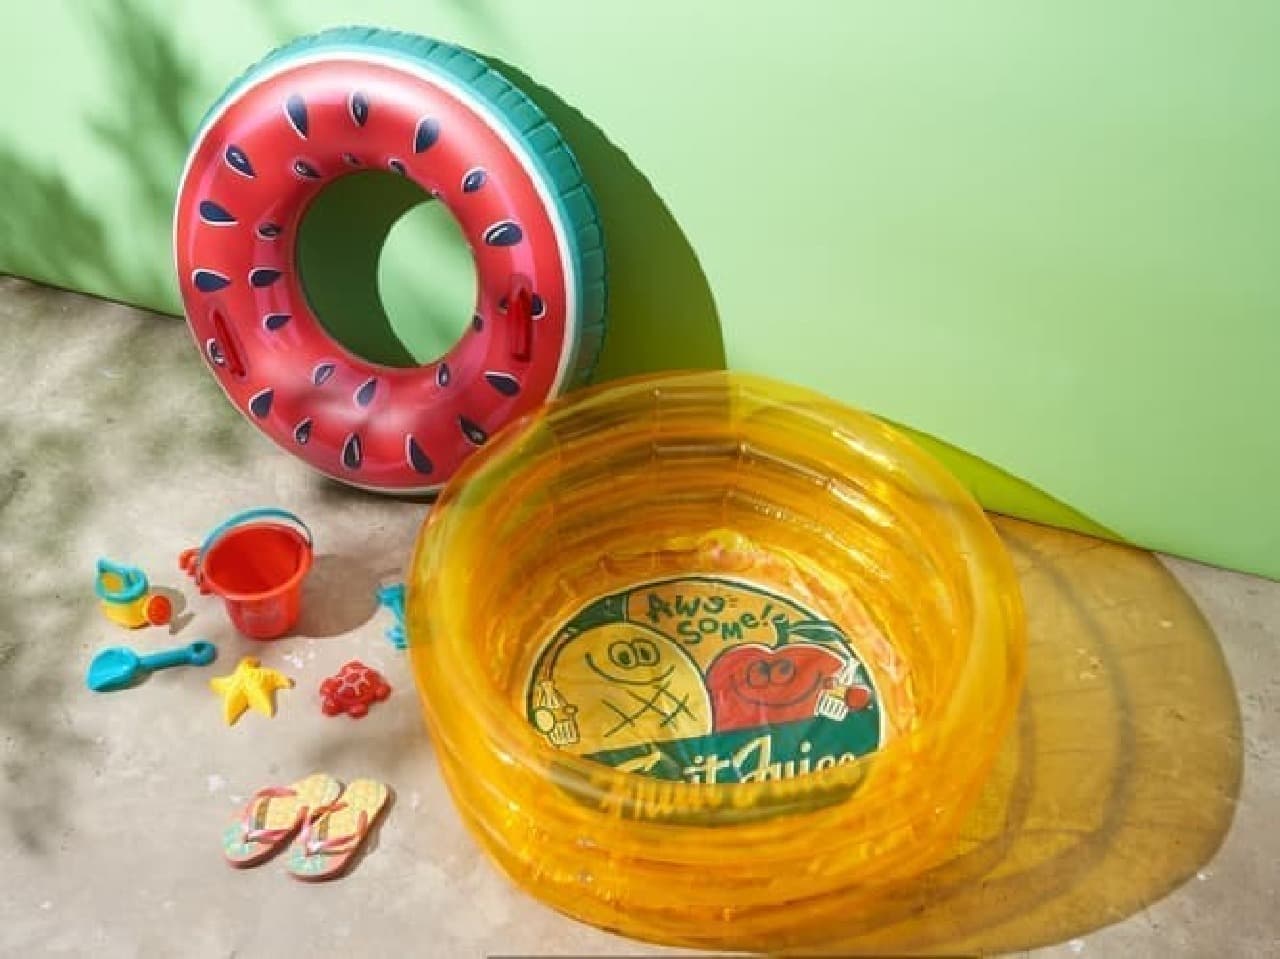 Colorful and fun! AWESOME STORE beach & pool supplies--you can enjoy the festive mood